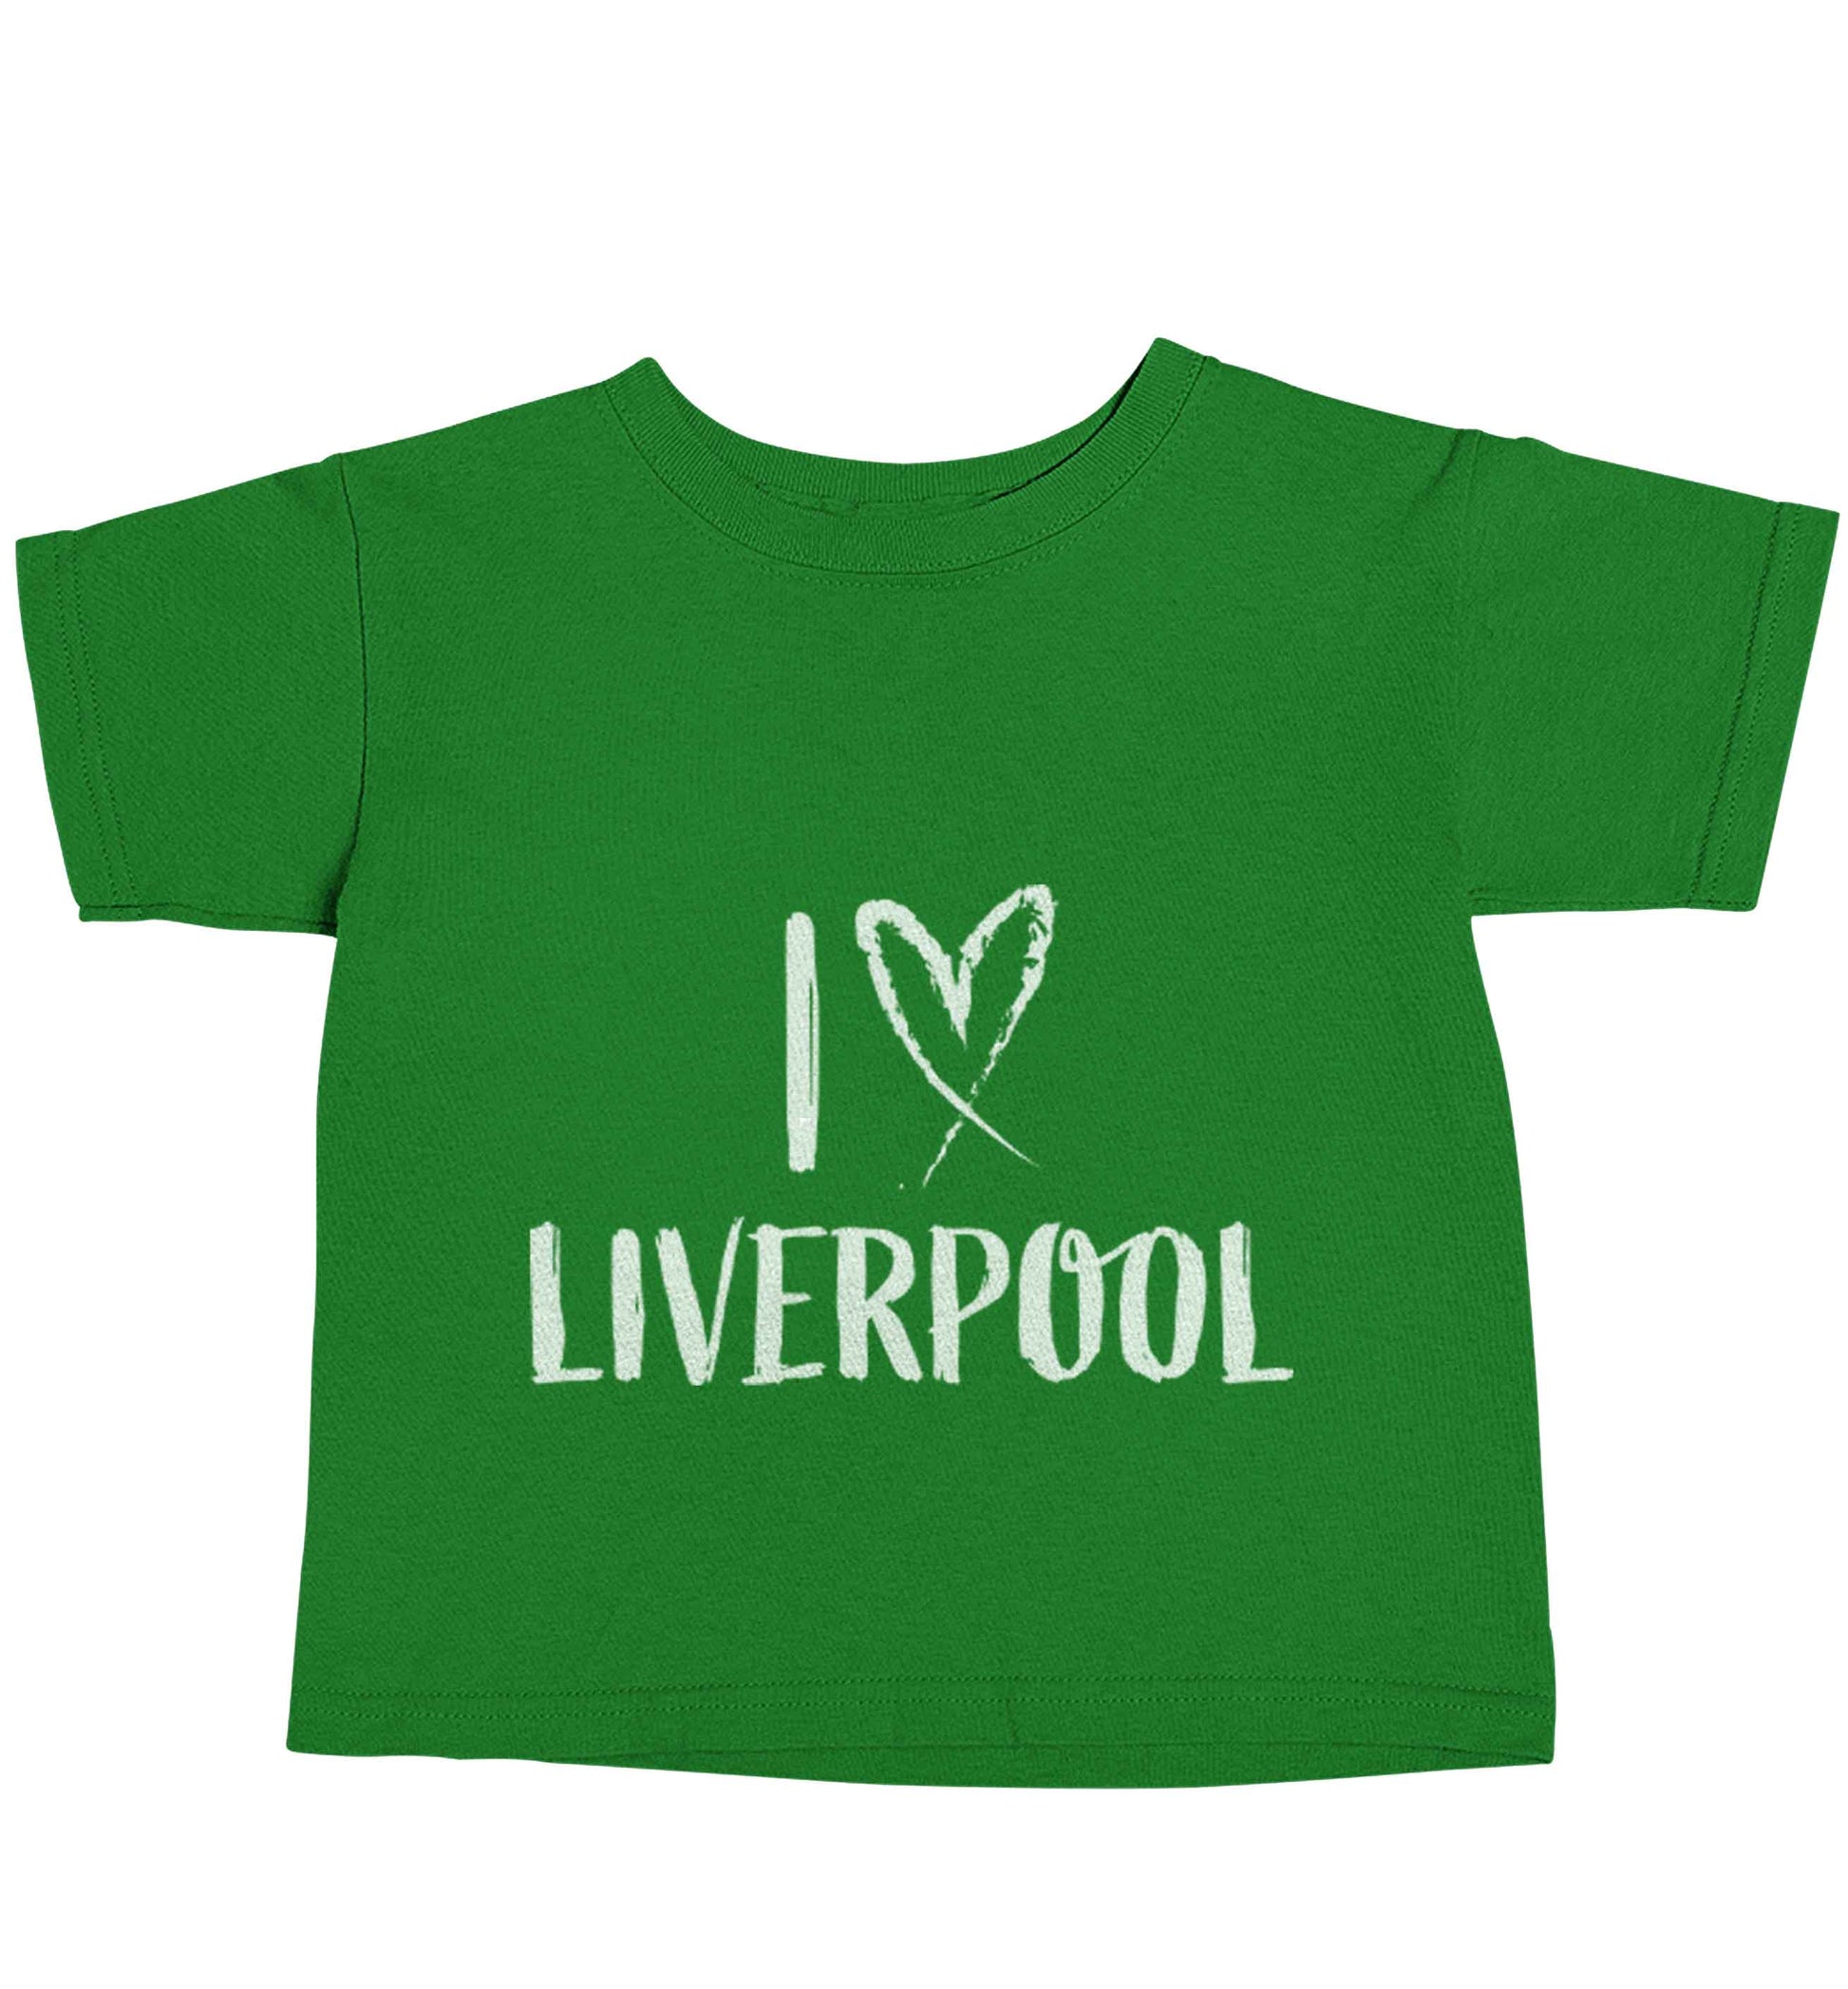 I love Liverpool green baby toddler Tshirt 2 Years